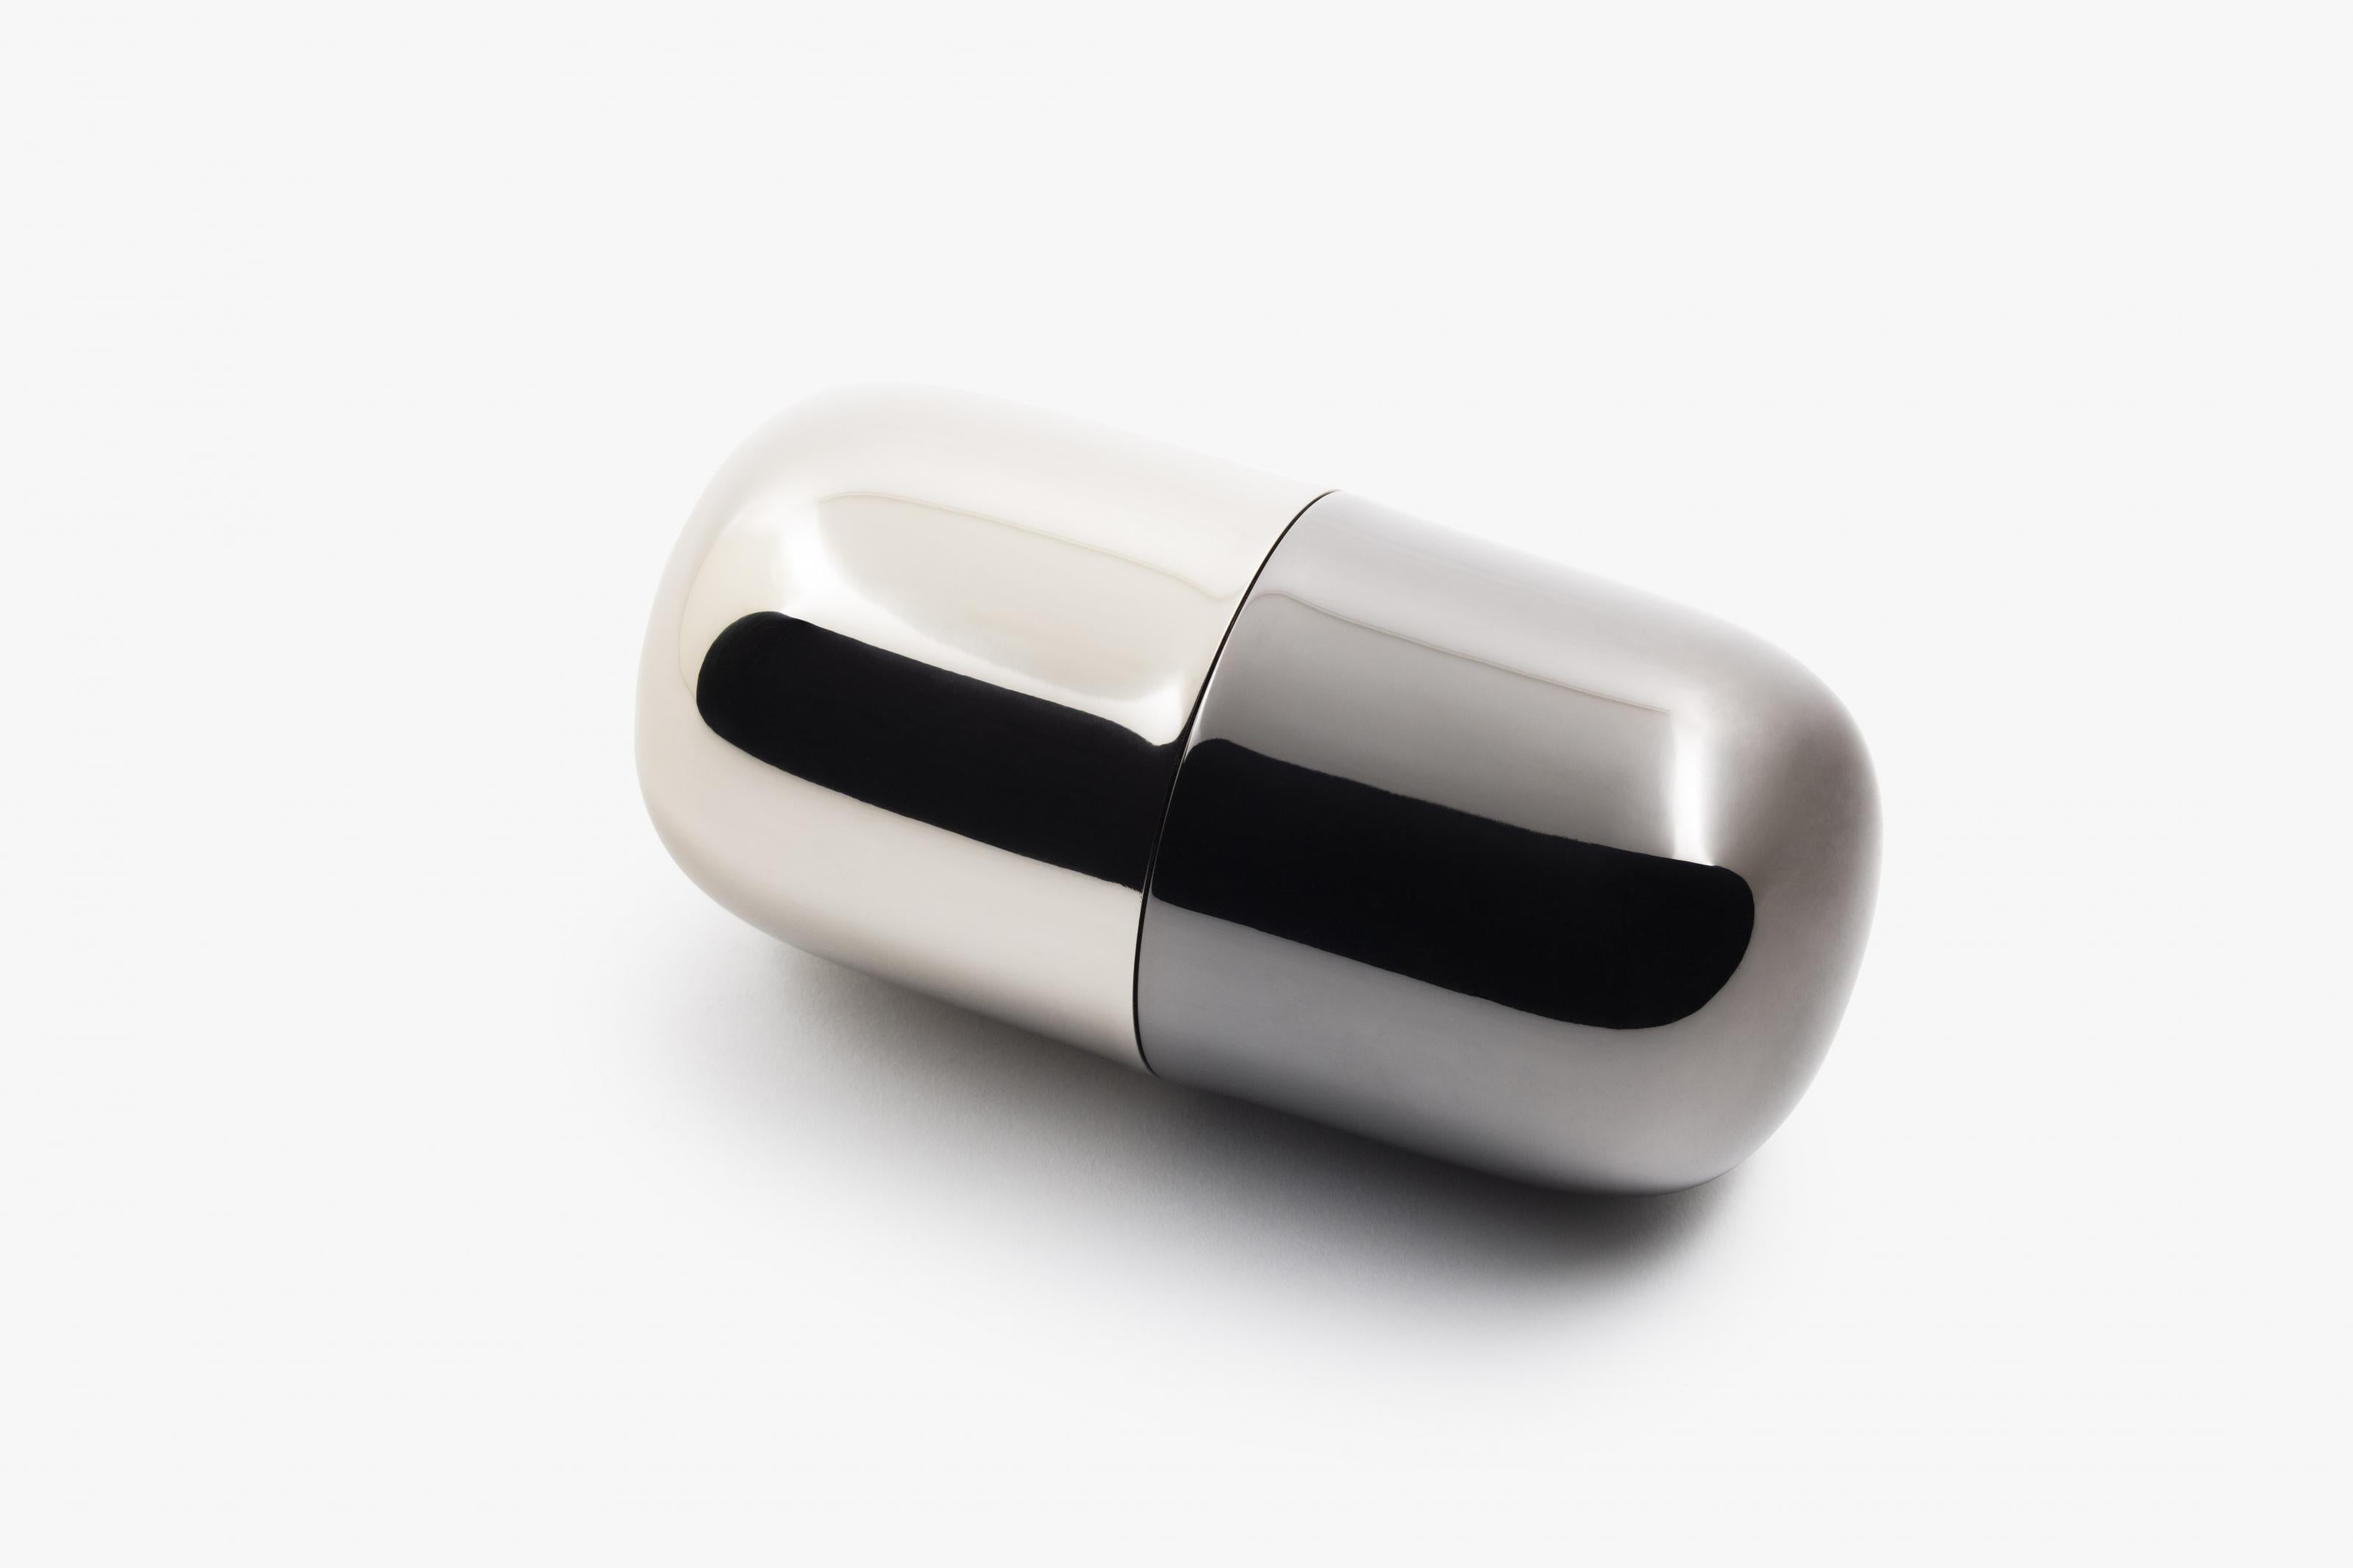 Capsule
Our capsules question our consumption in general! Is our consumption conscious?
They are small sculptures that can be used as door objects, table decorations, shelves, etc. With the capsule, your environment becomes more charming and